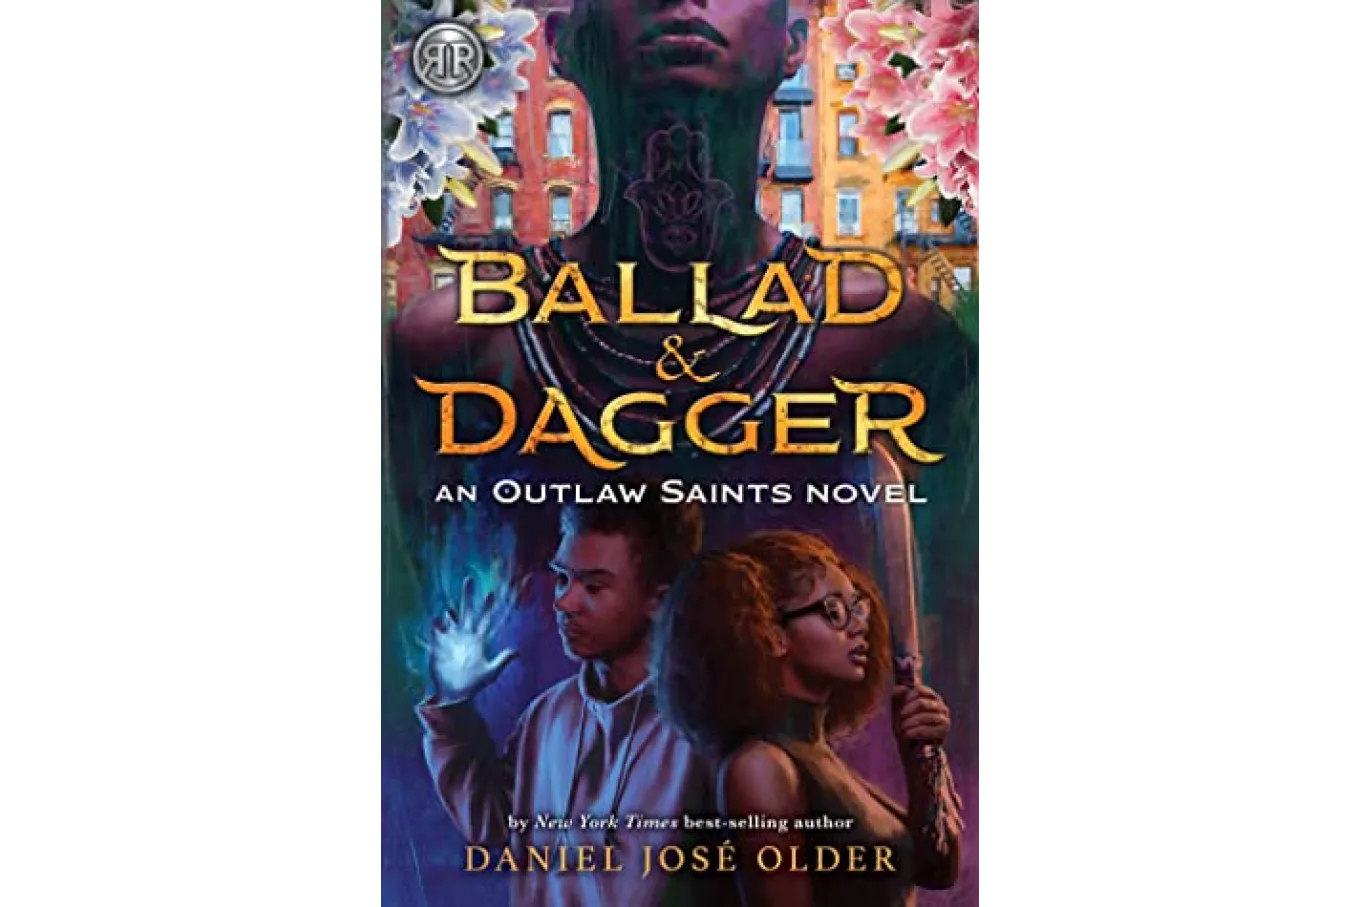 Cover of Ballad and Dagger by Daniel Jose Older